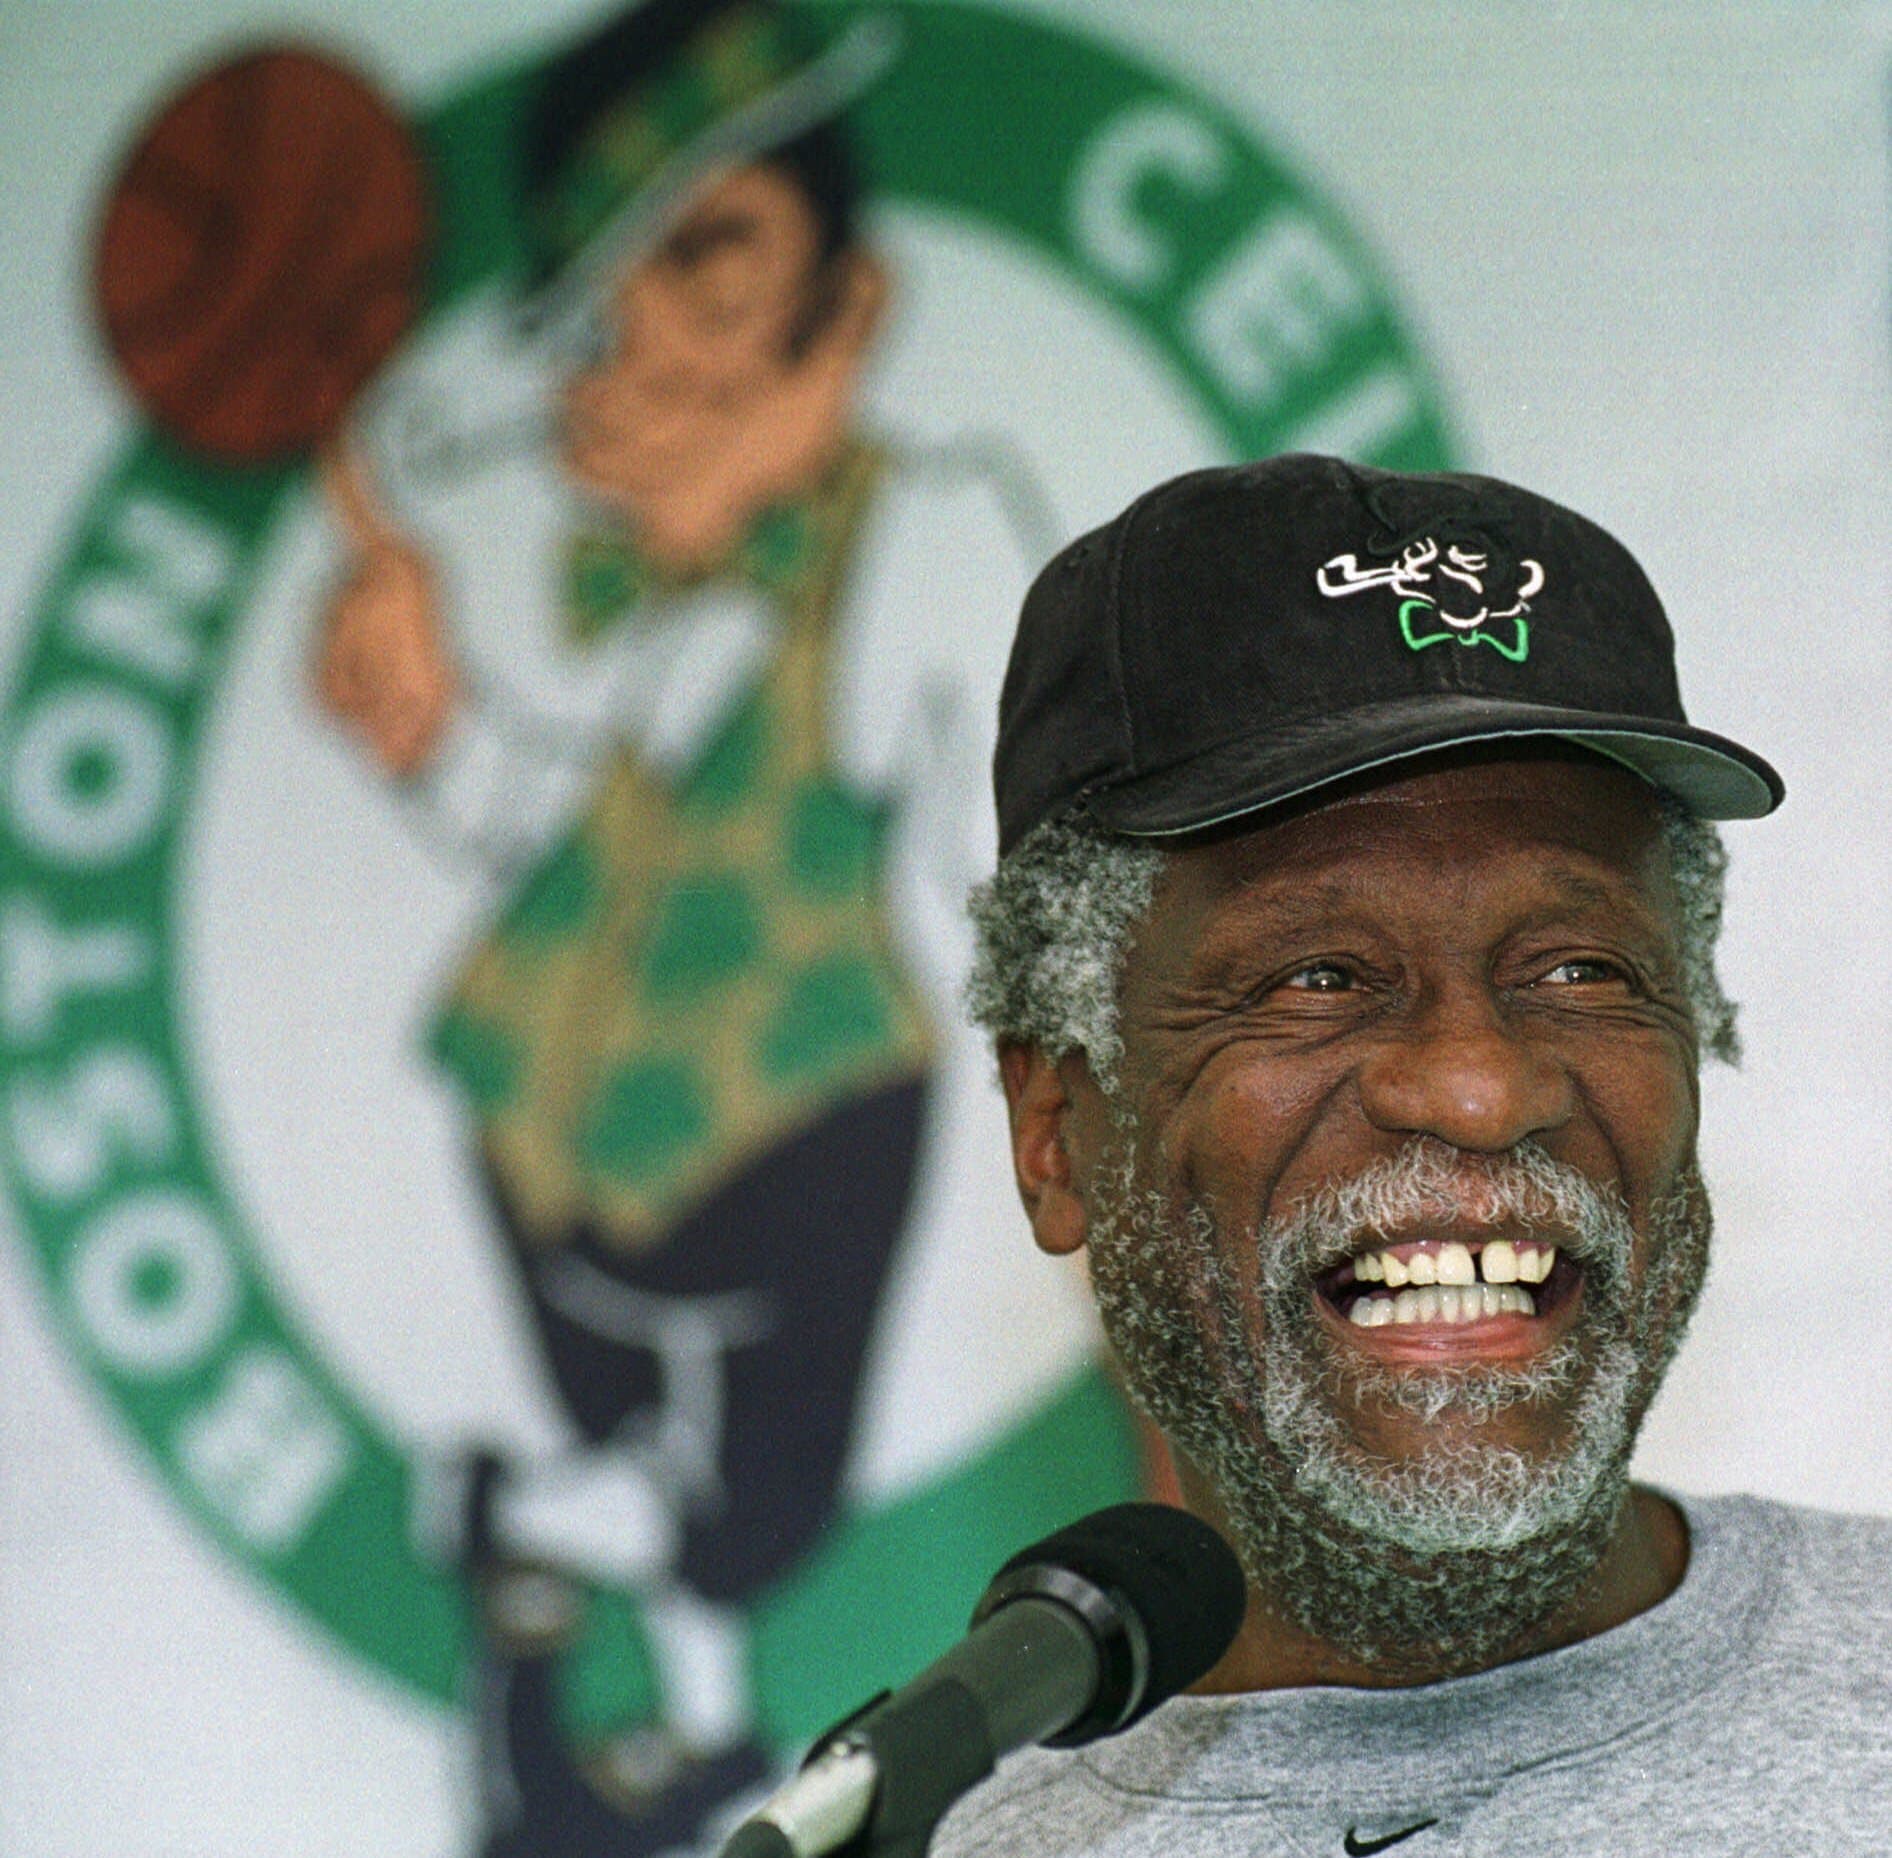 Boston Celtics legendary center Bill Russell answers questions from members of the media after a Celtics team practice in Waltham, Massachusetts on Oct. 11, 1999. (Angela Rowlings/AP)